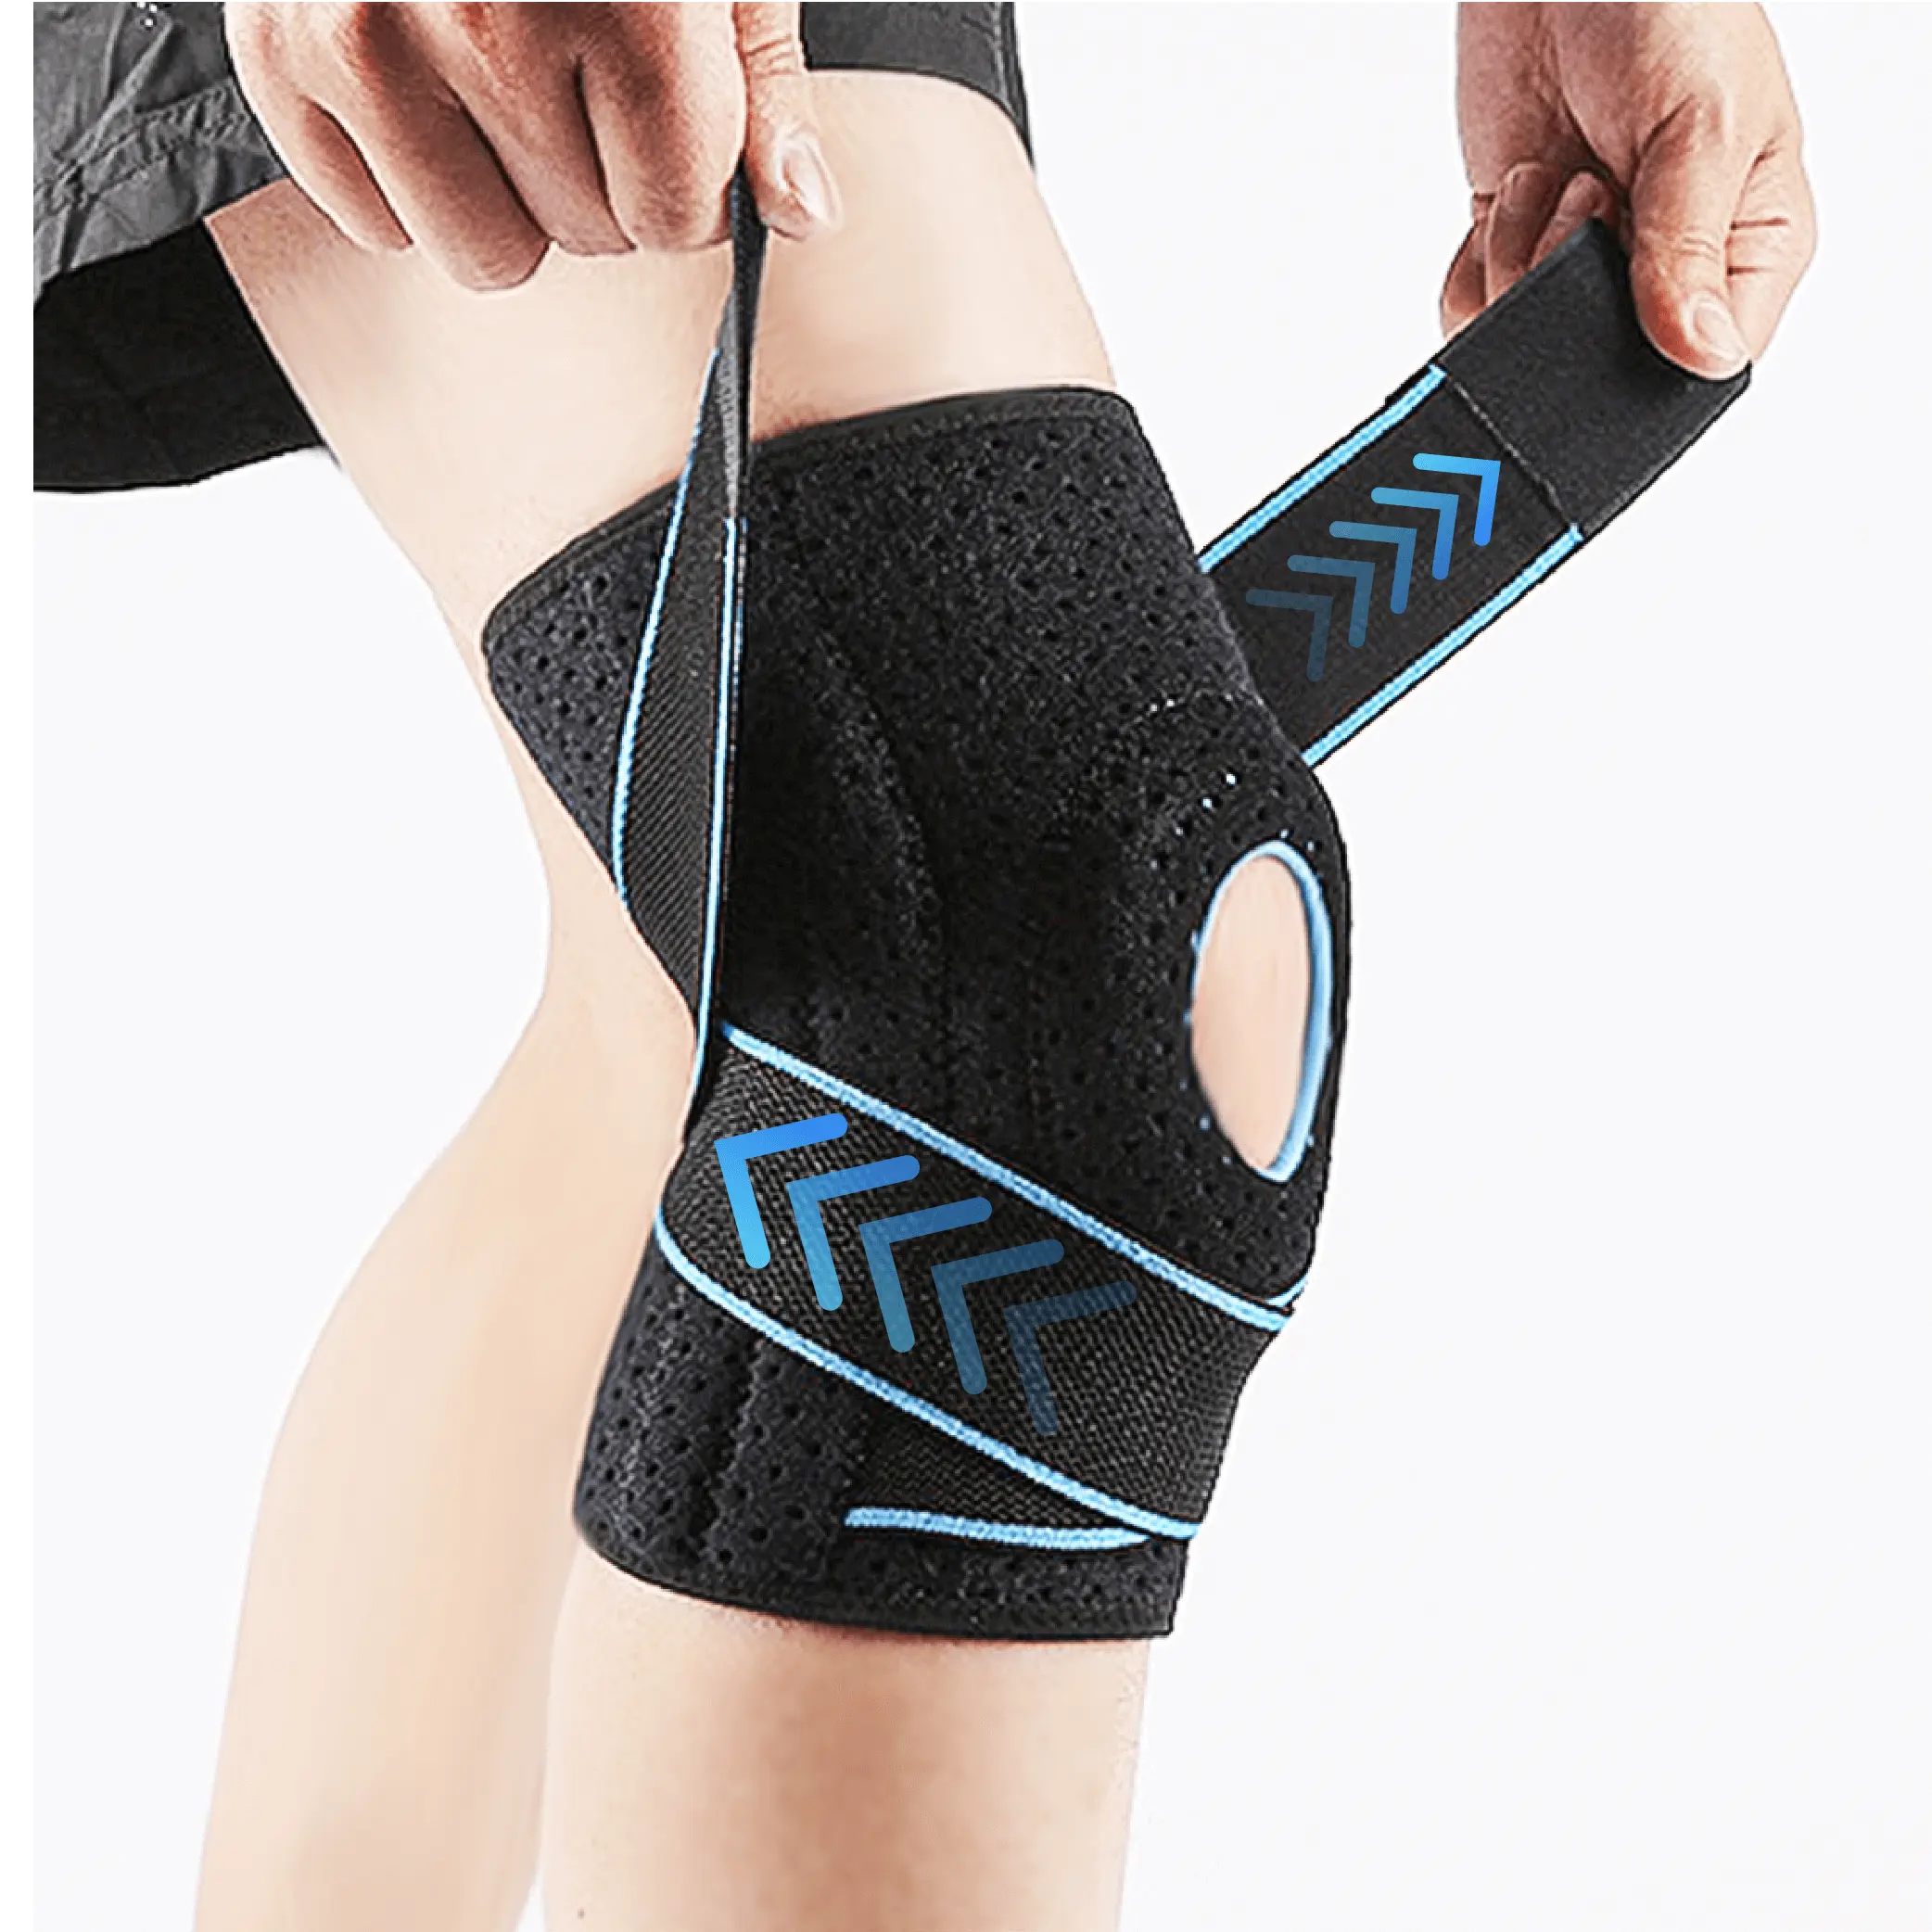 Sports equipments protect gel pad knee brace with side stabilizers